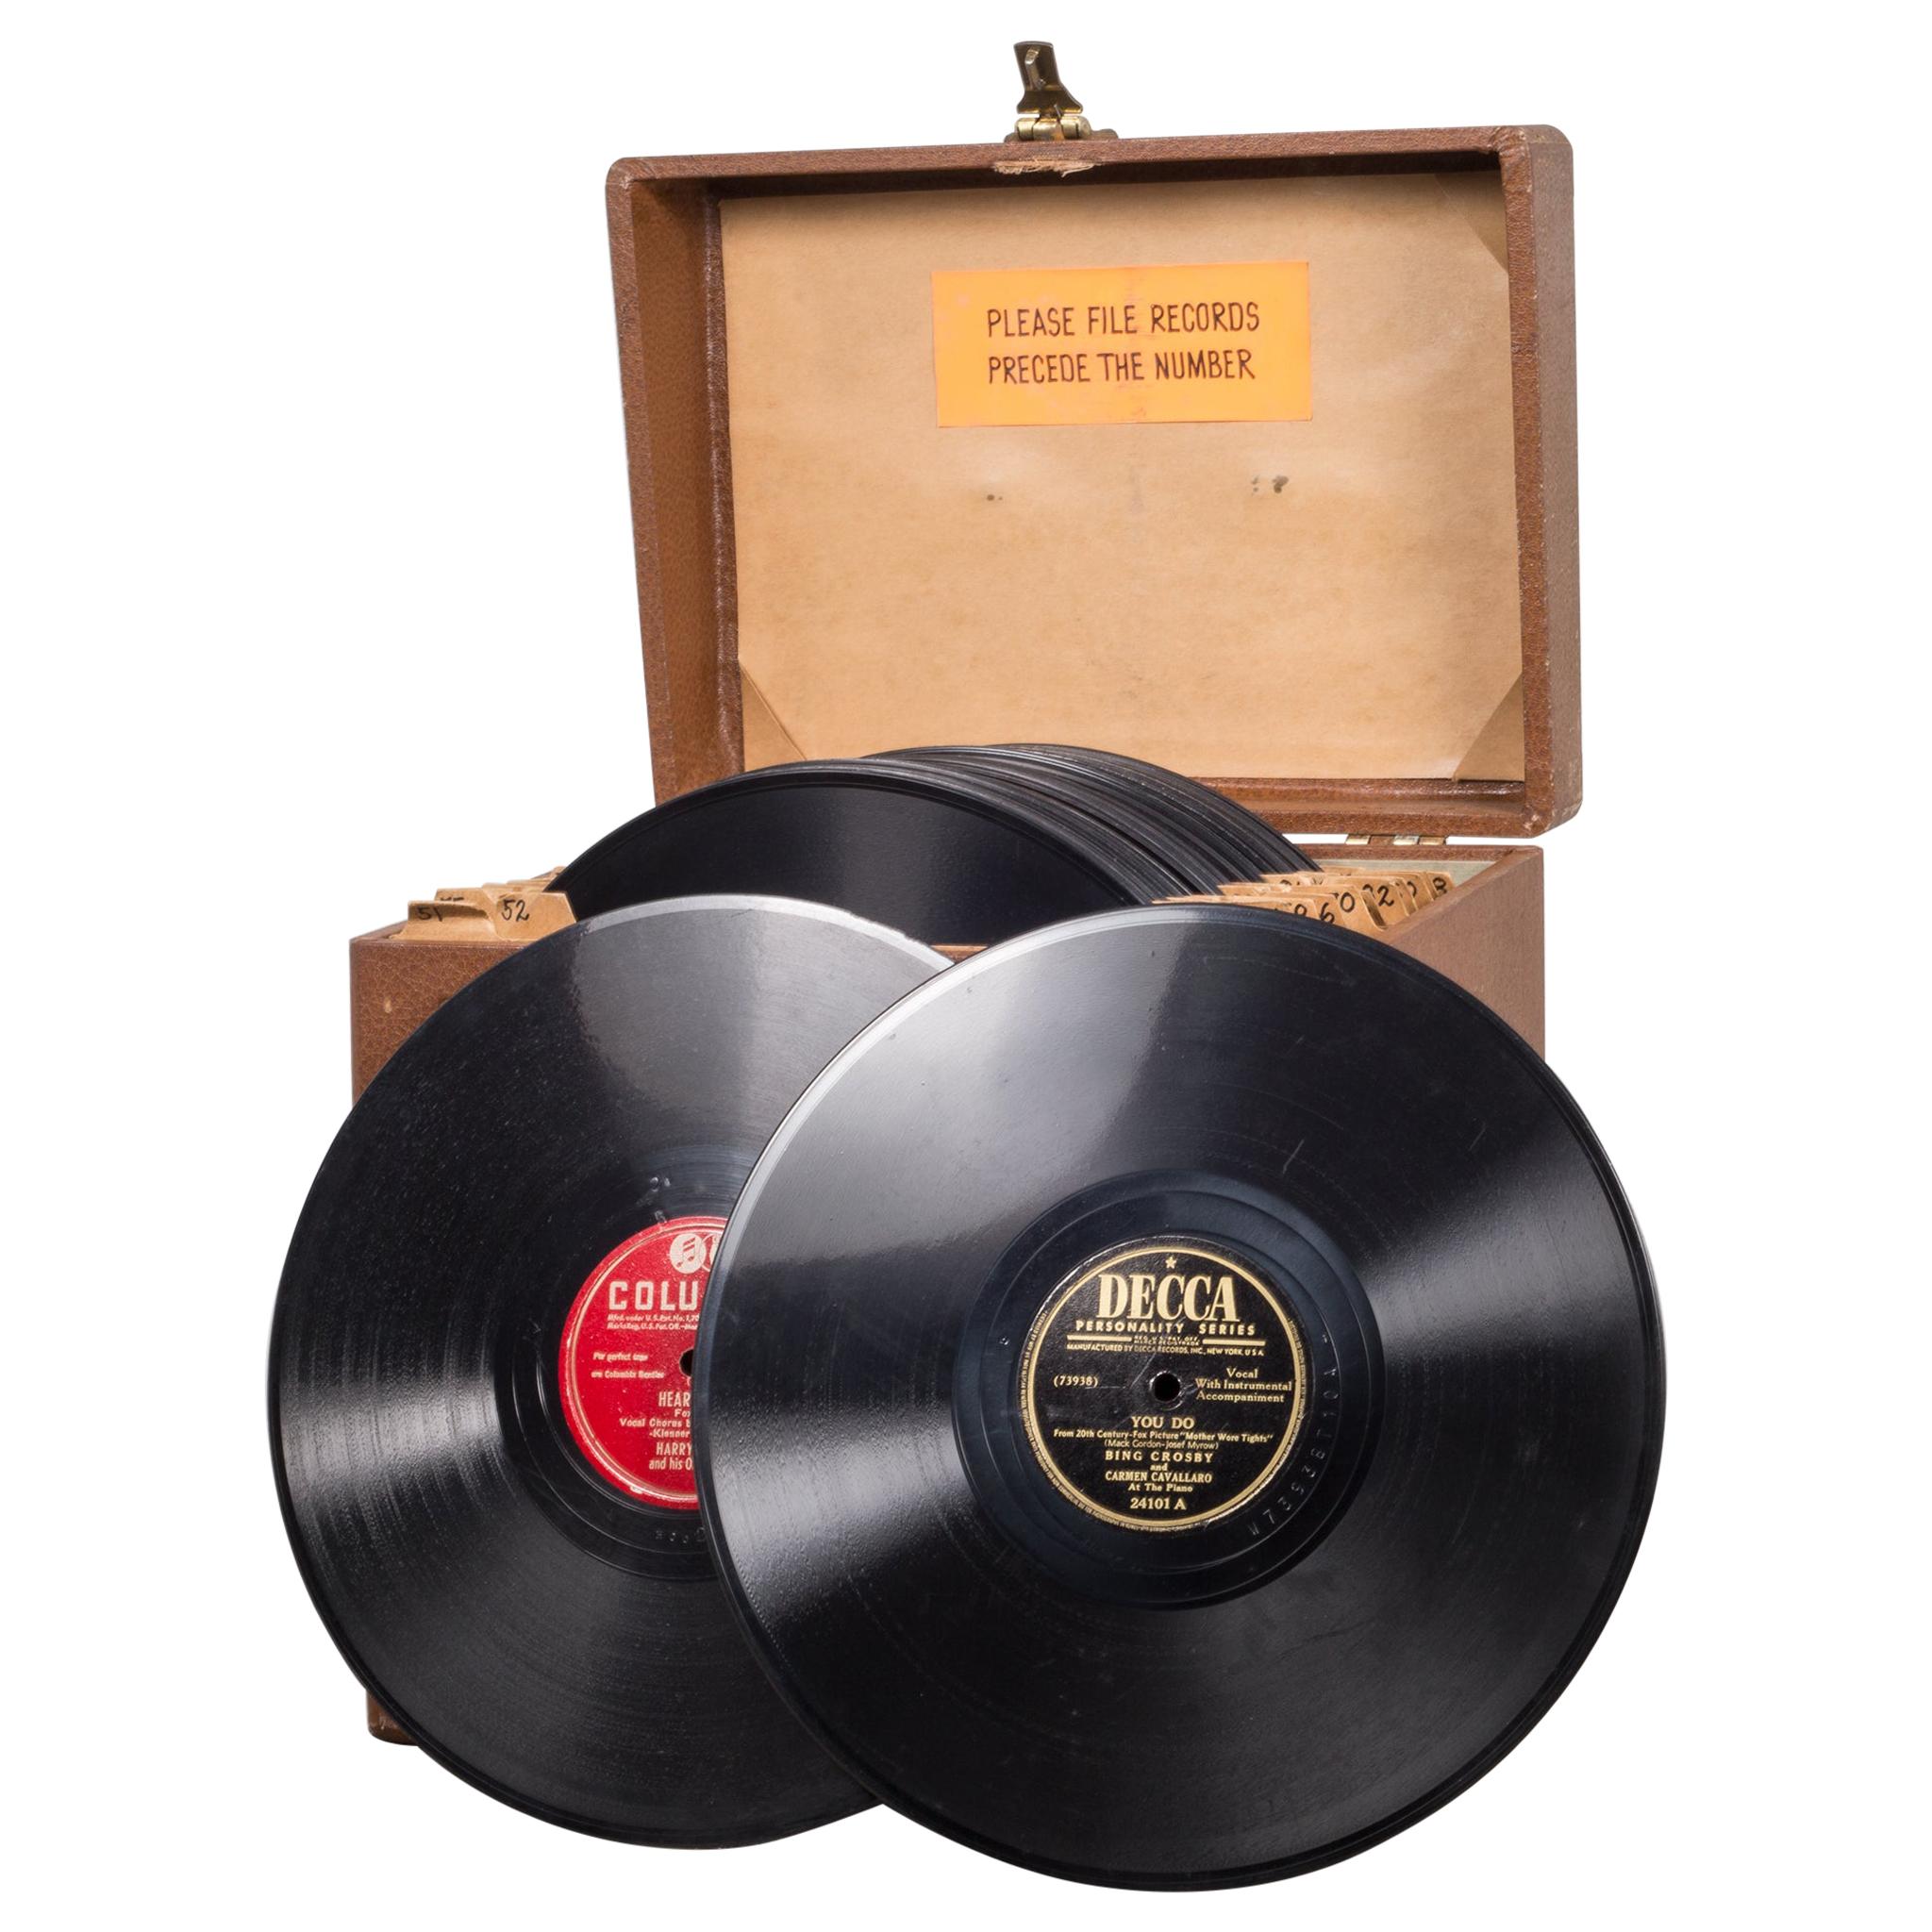 Collection of Vintage Records in Case circa 1940-1950 